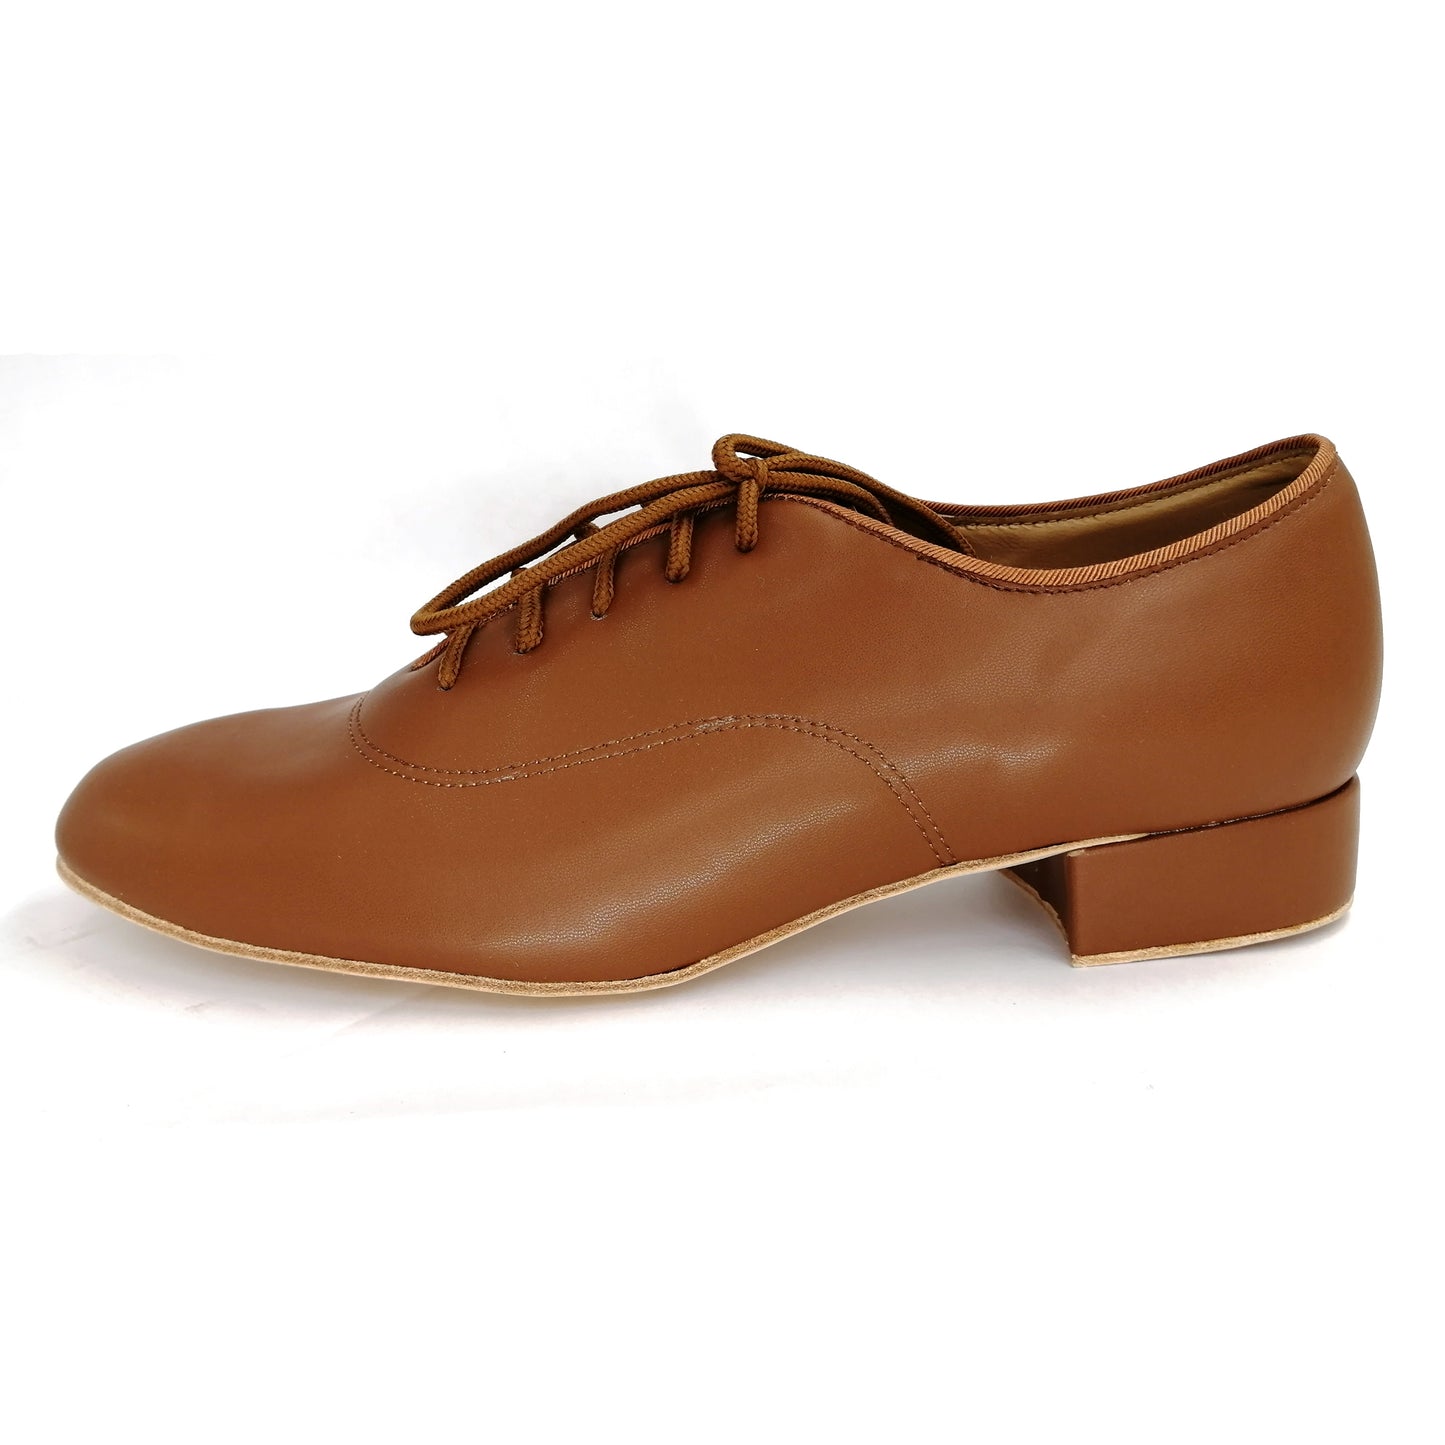 Pro Dancer Men's Argentine Tango Shoes Leather Sole 1 inch Heel Lace-up Brown (PD-1004A)